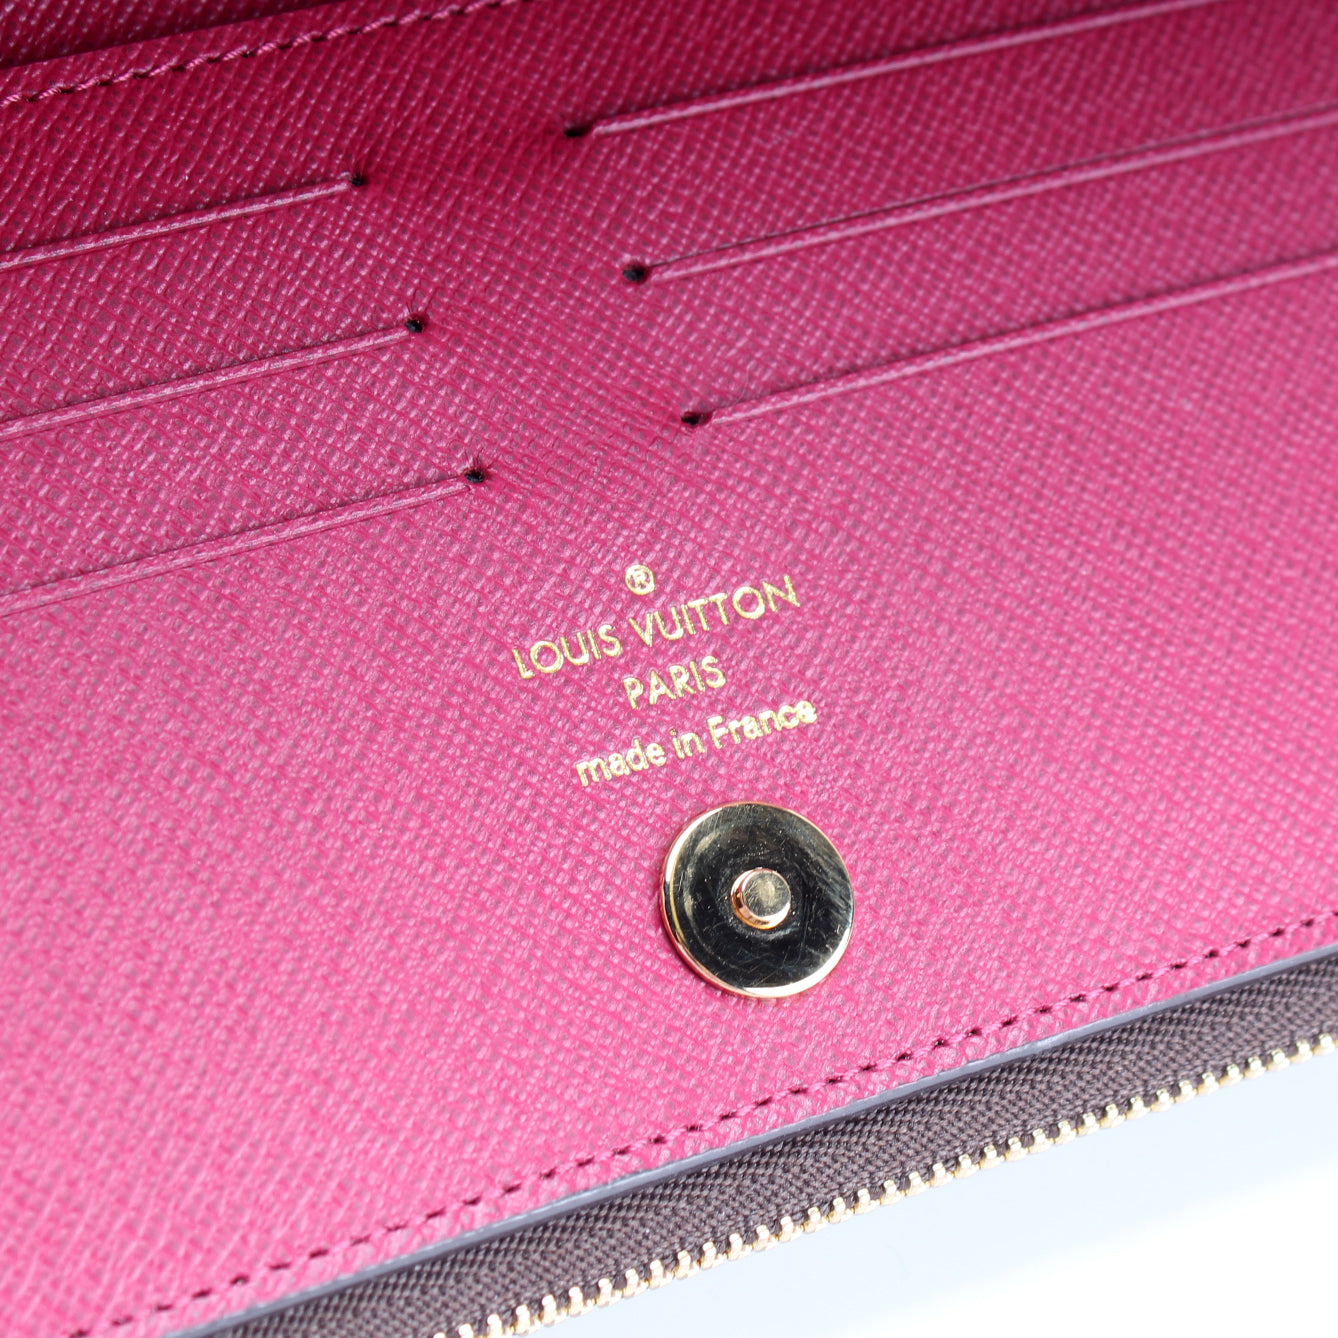 LOUIS VUITTON - ADELE WALLET, what fits